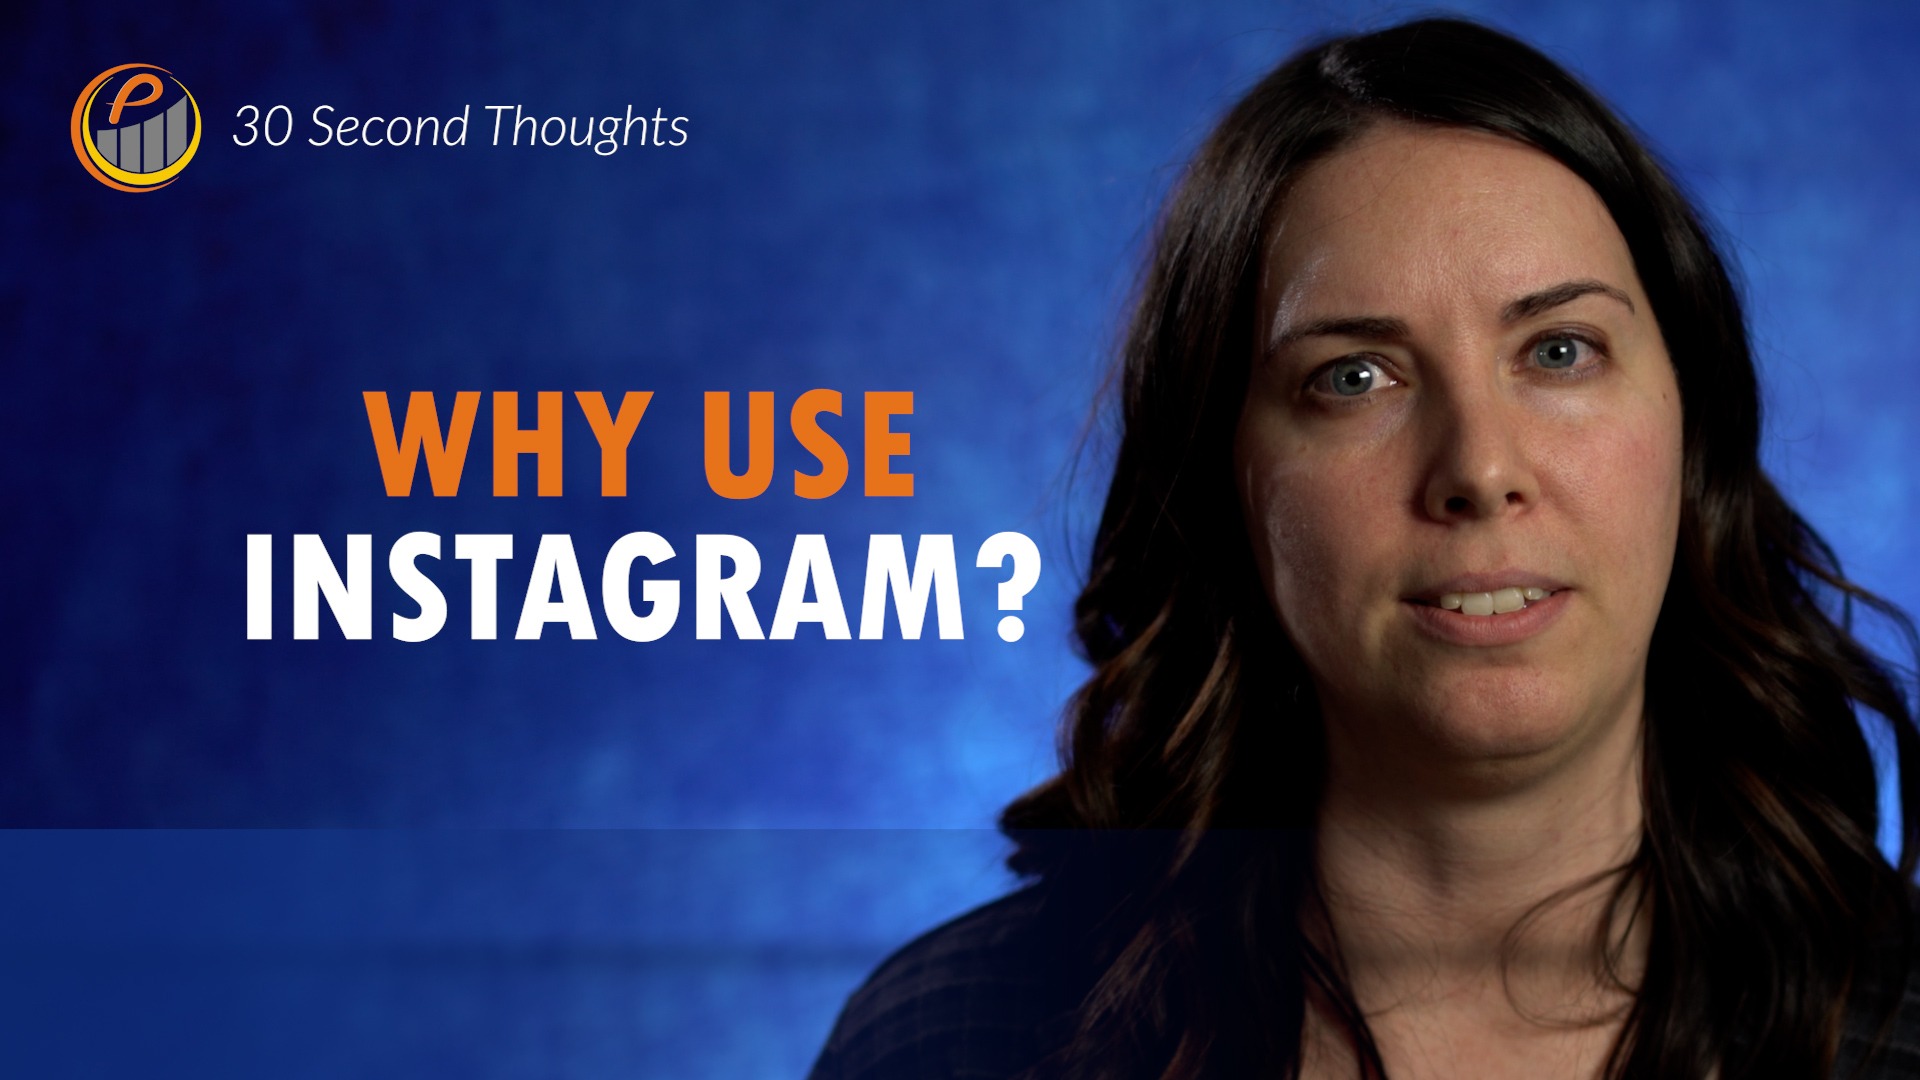 Why Use Instagram?